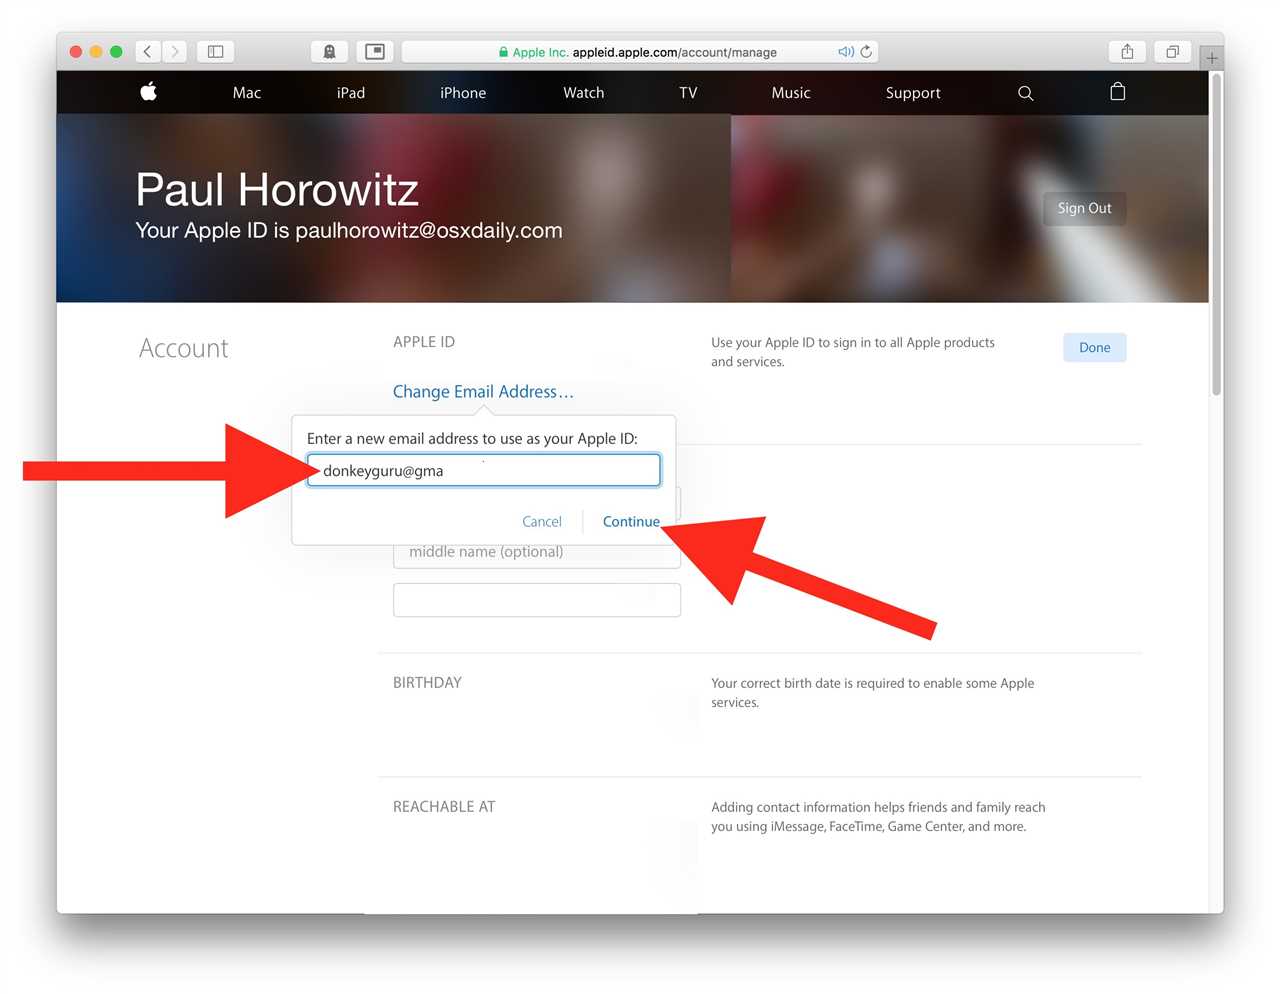 Section 2: Changing Your iCloud Email Address